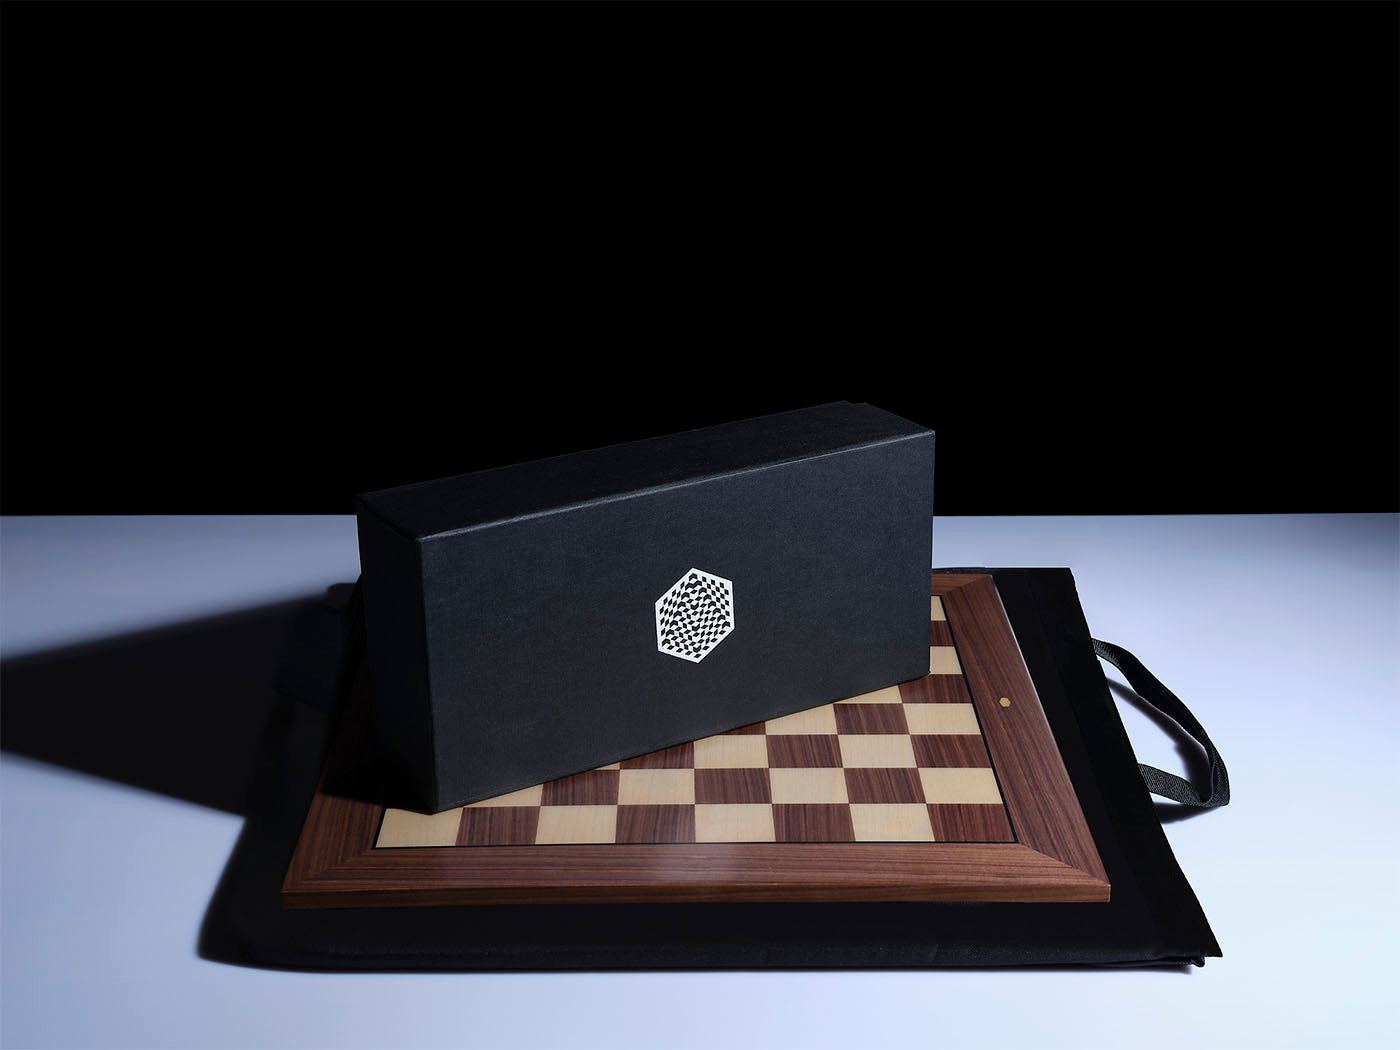 World Chess Championship Set (Wenge Board) - buy online with